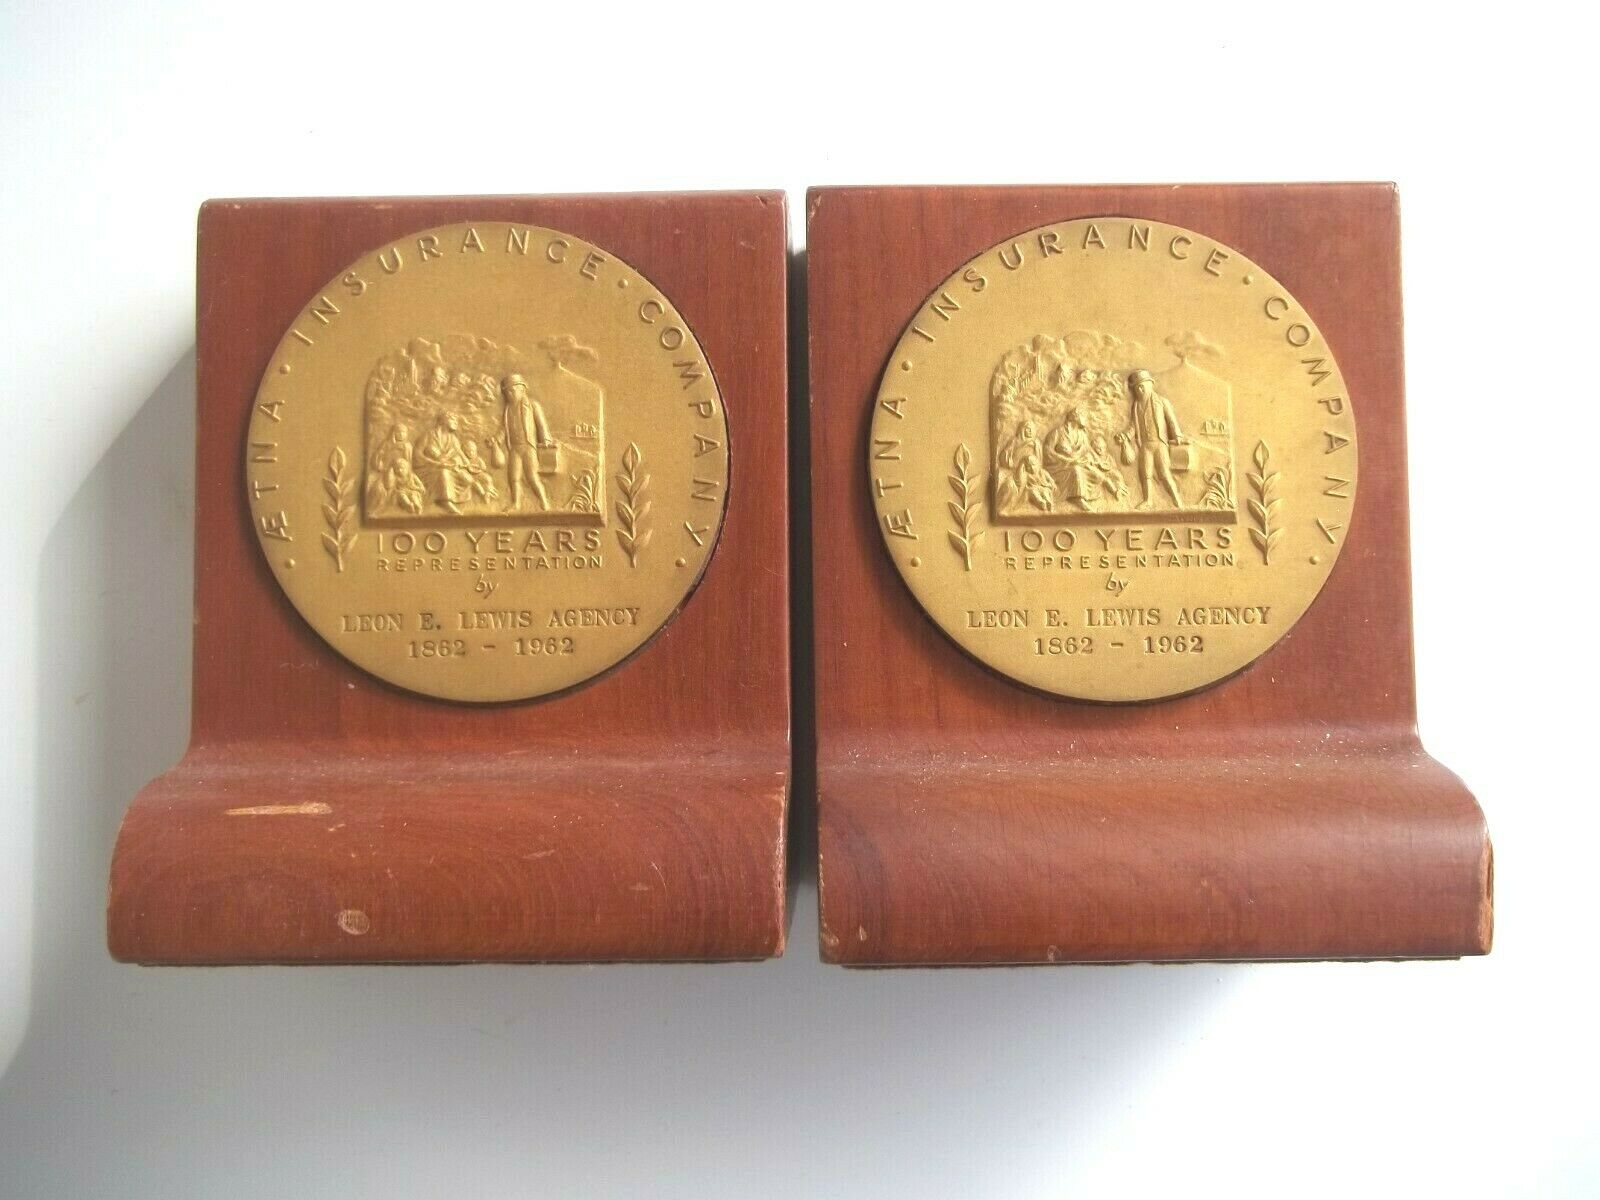 RARE 1862-1962 100 YRS AETNA Insurance Co bronze/brass Wood Advertising Bookends